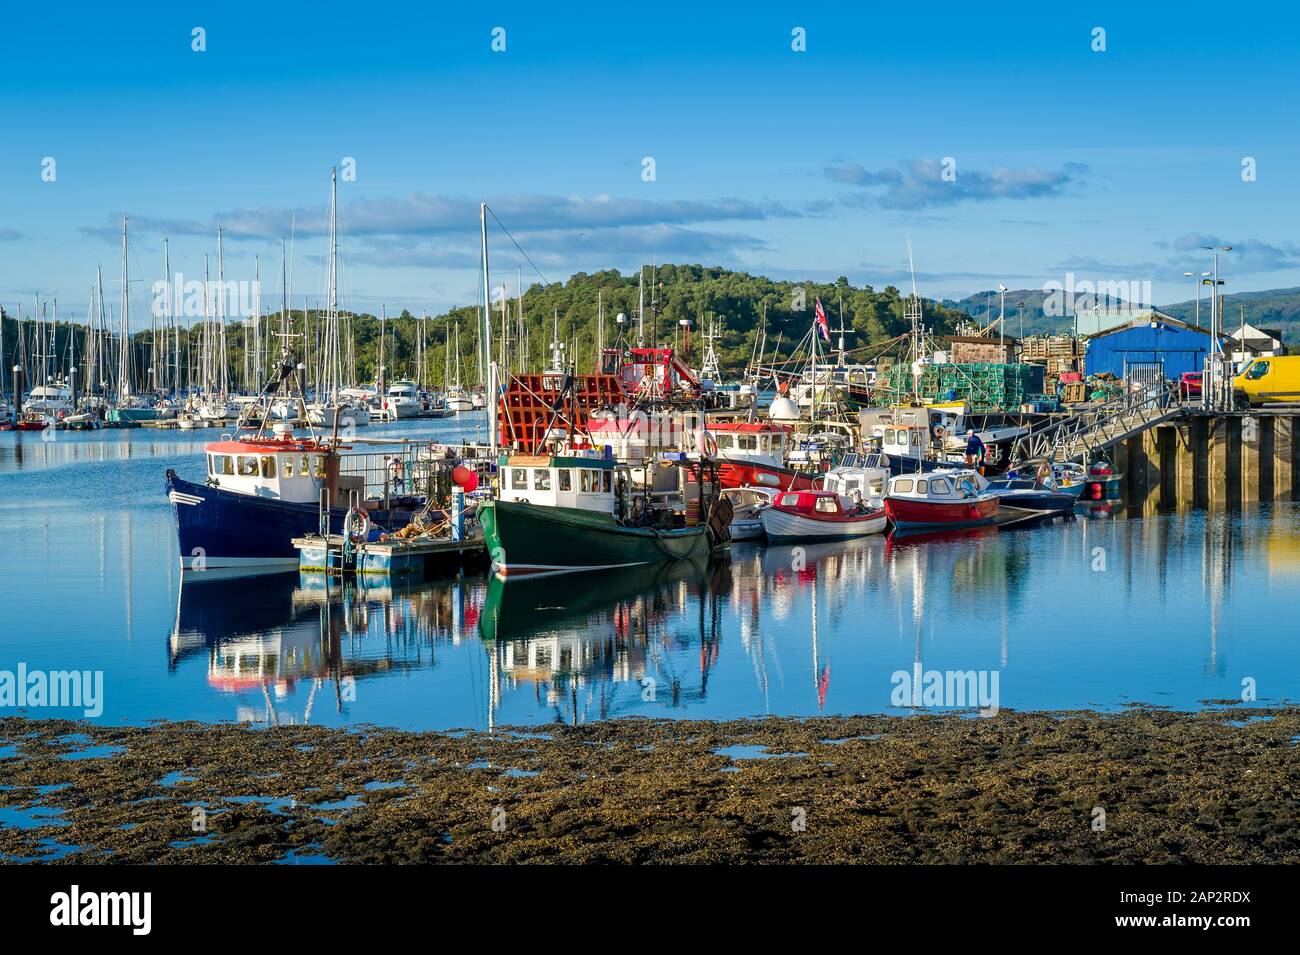 Tarbert harbor with colorful fisherman's boats and sailing yachts docked. Hebrides, Scotland. Stock Photo